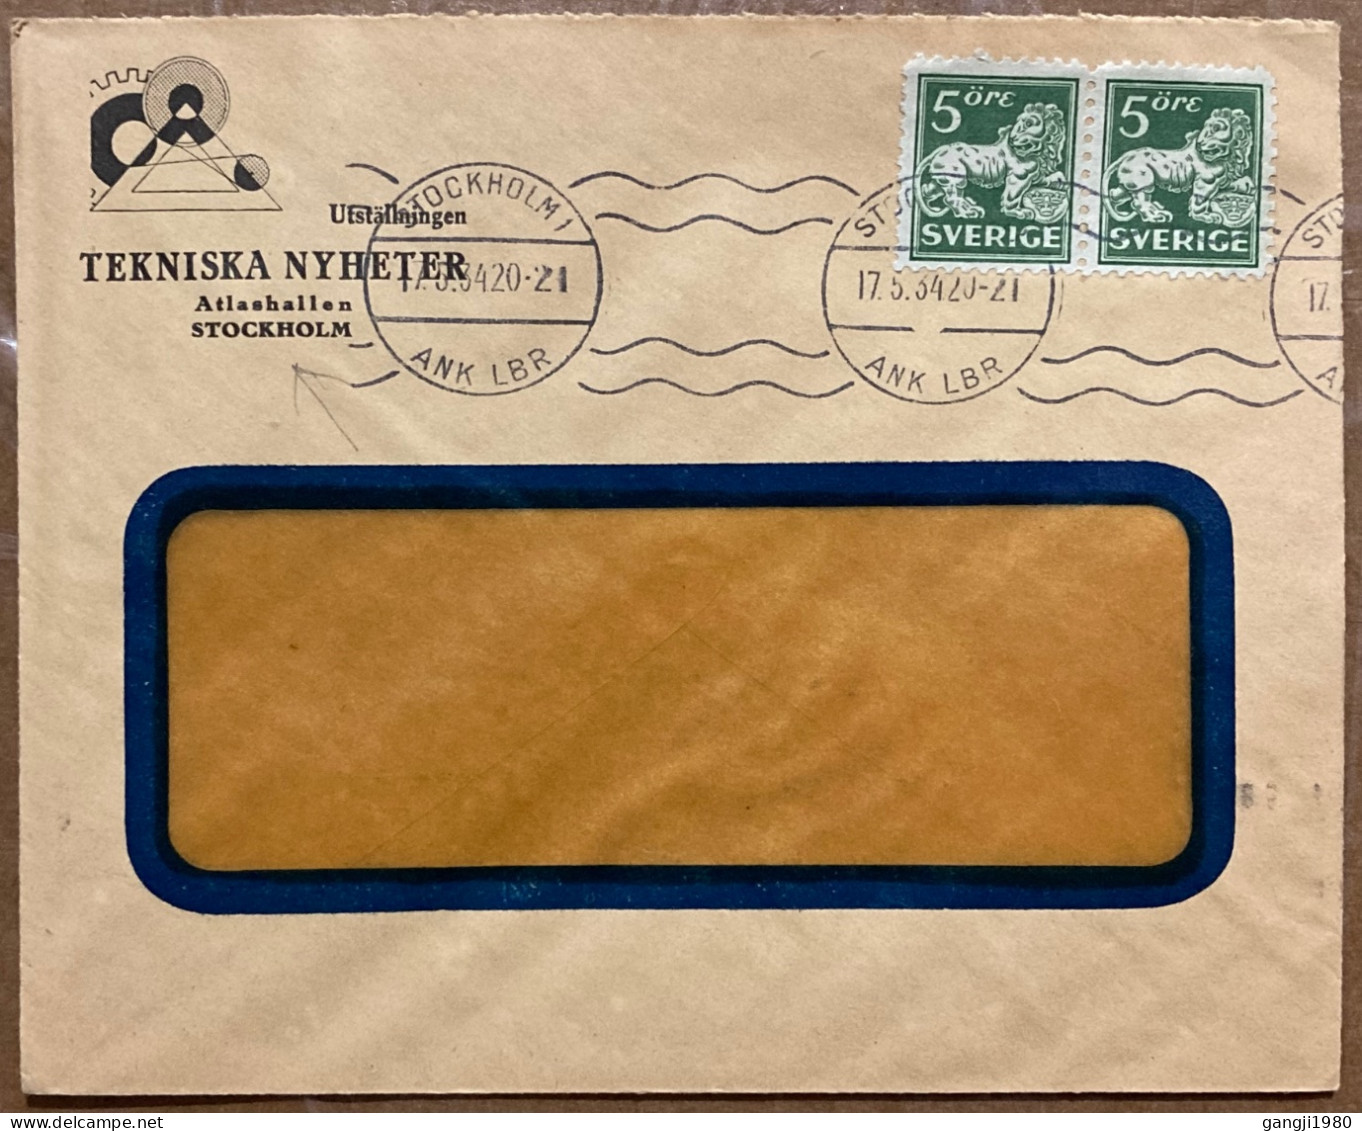 SWEDEN 1934, ADVERTISING COVER USED, TECHNICAL NEWS & EXHIBITION, STOCKHOLM CITY CANCEL, LION  2 STAMP. - Lettres & Documents